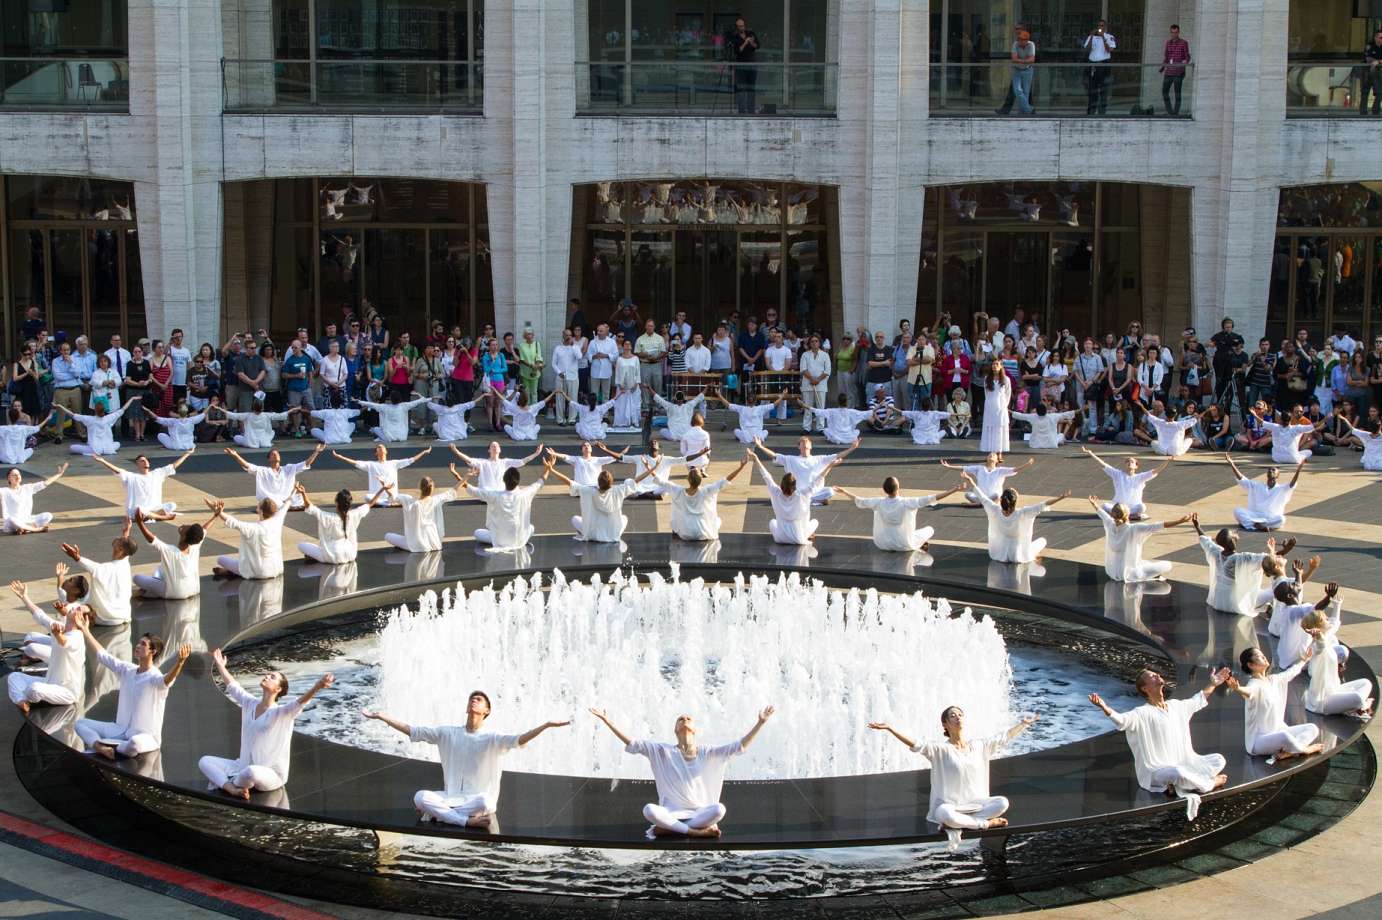 Dancers dressed in white surround Lincoln Center's Revron Fountain during the Table of Silence